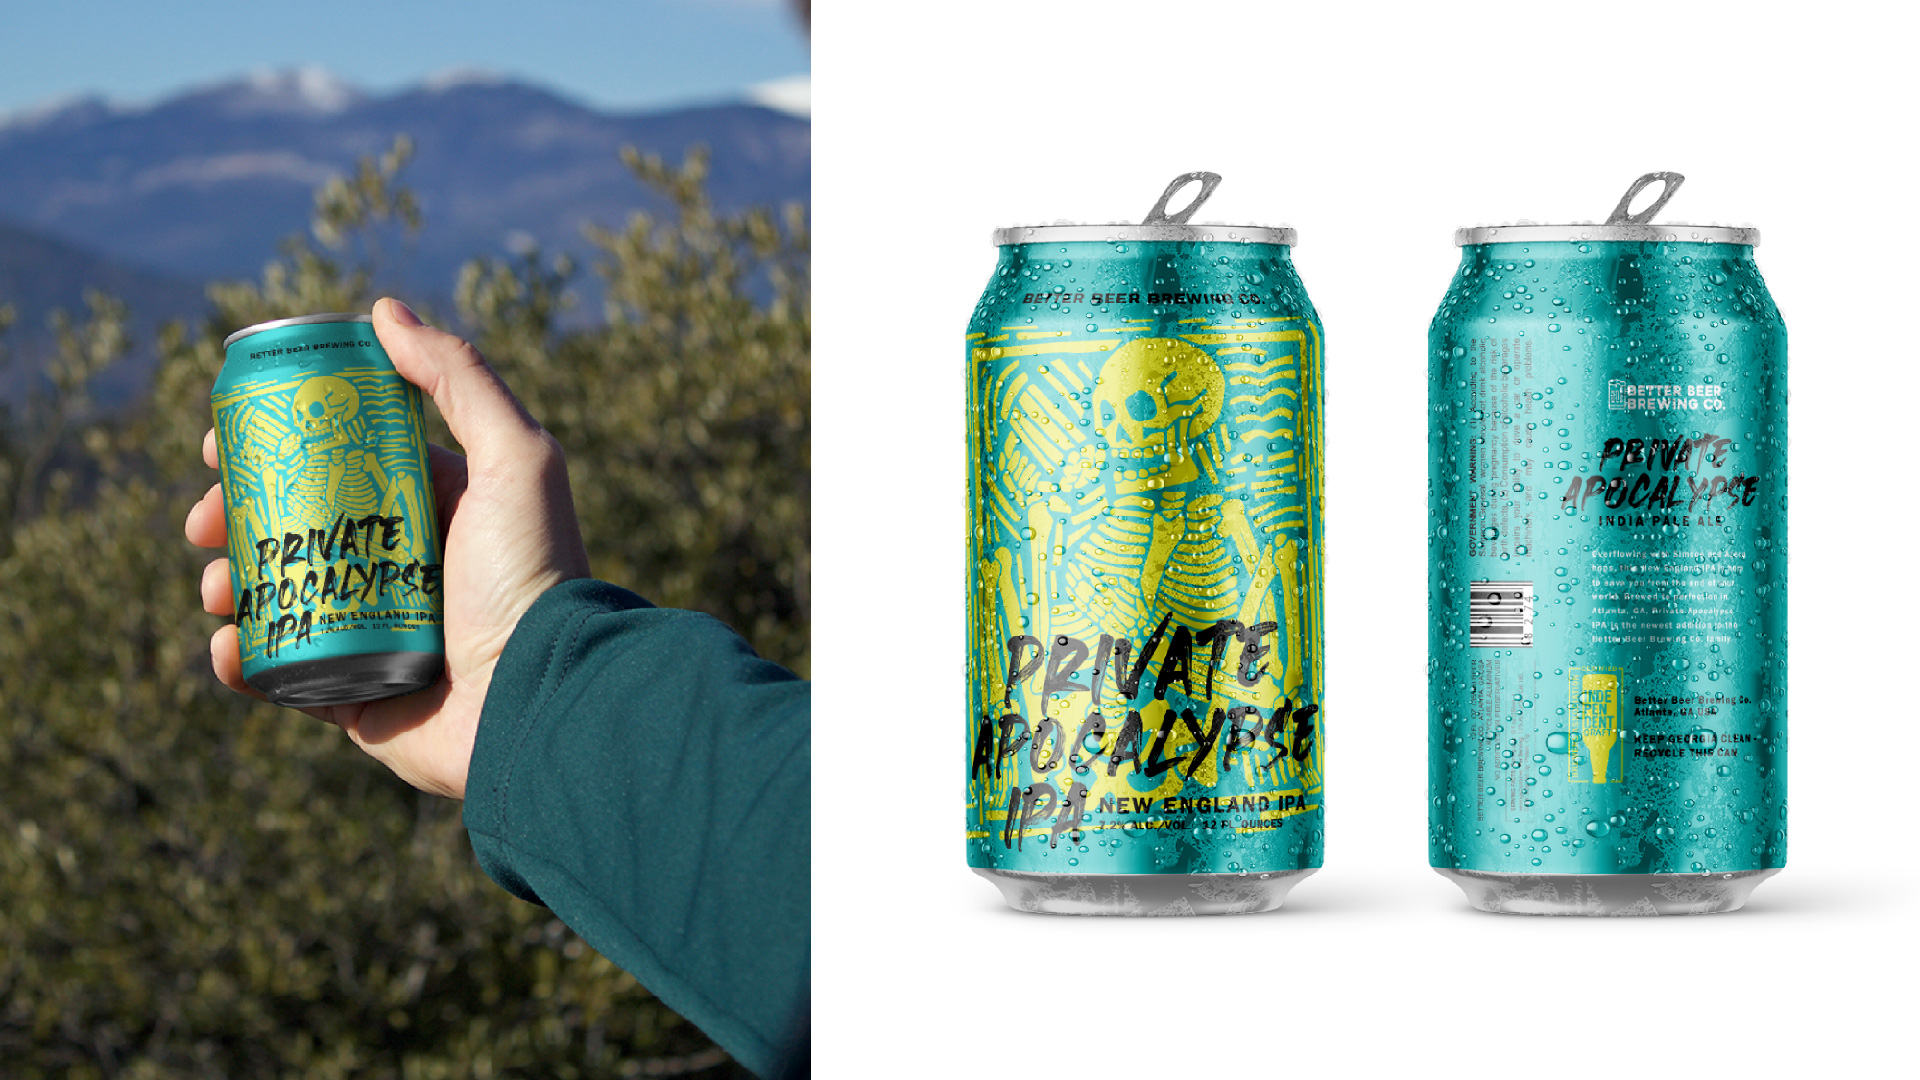  / “Private Apocalypse IPA,” beer packaging design, 12oz can, 2021. Better Beer’s newest New England IPA release that’s here to save you from the end of your world. 